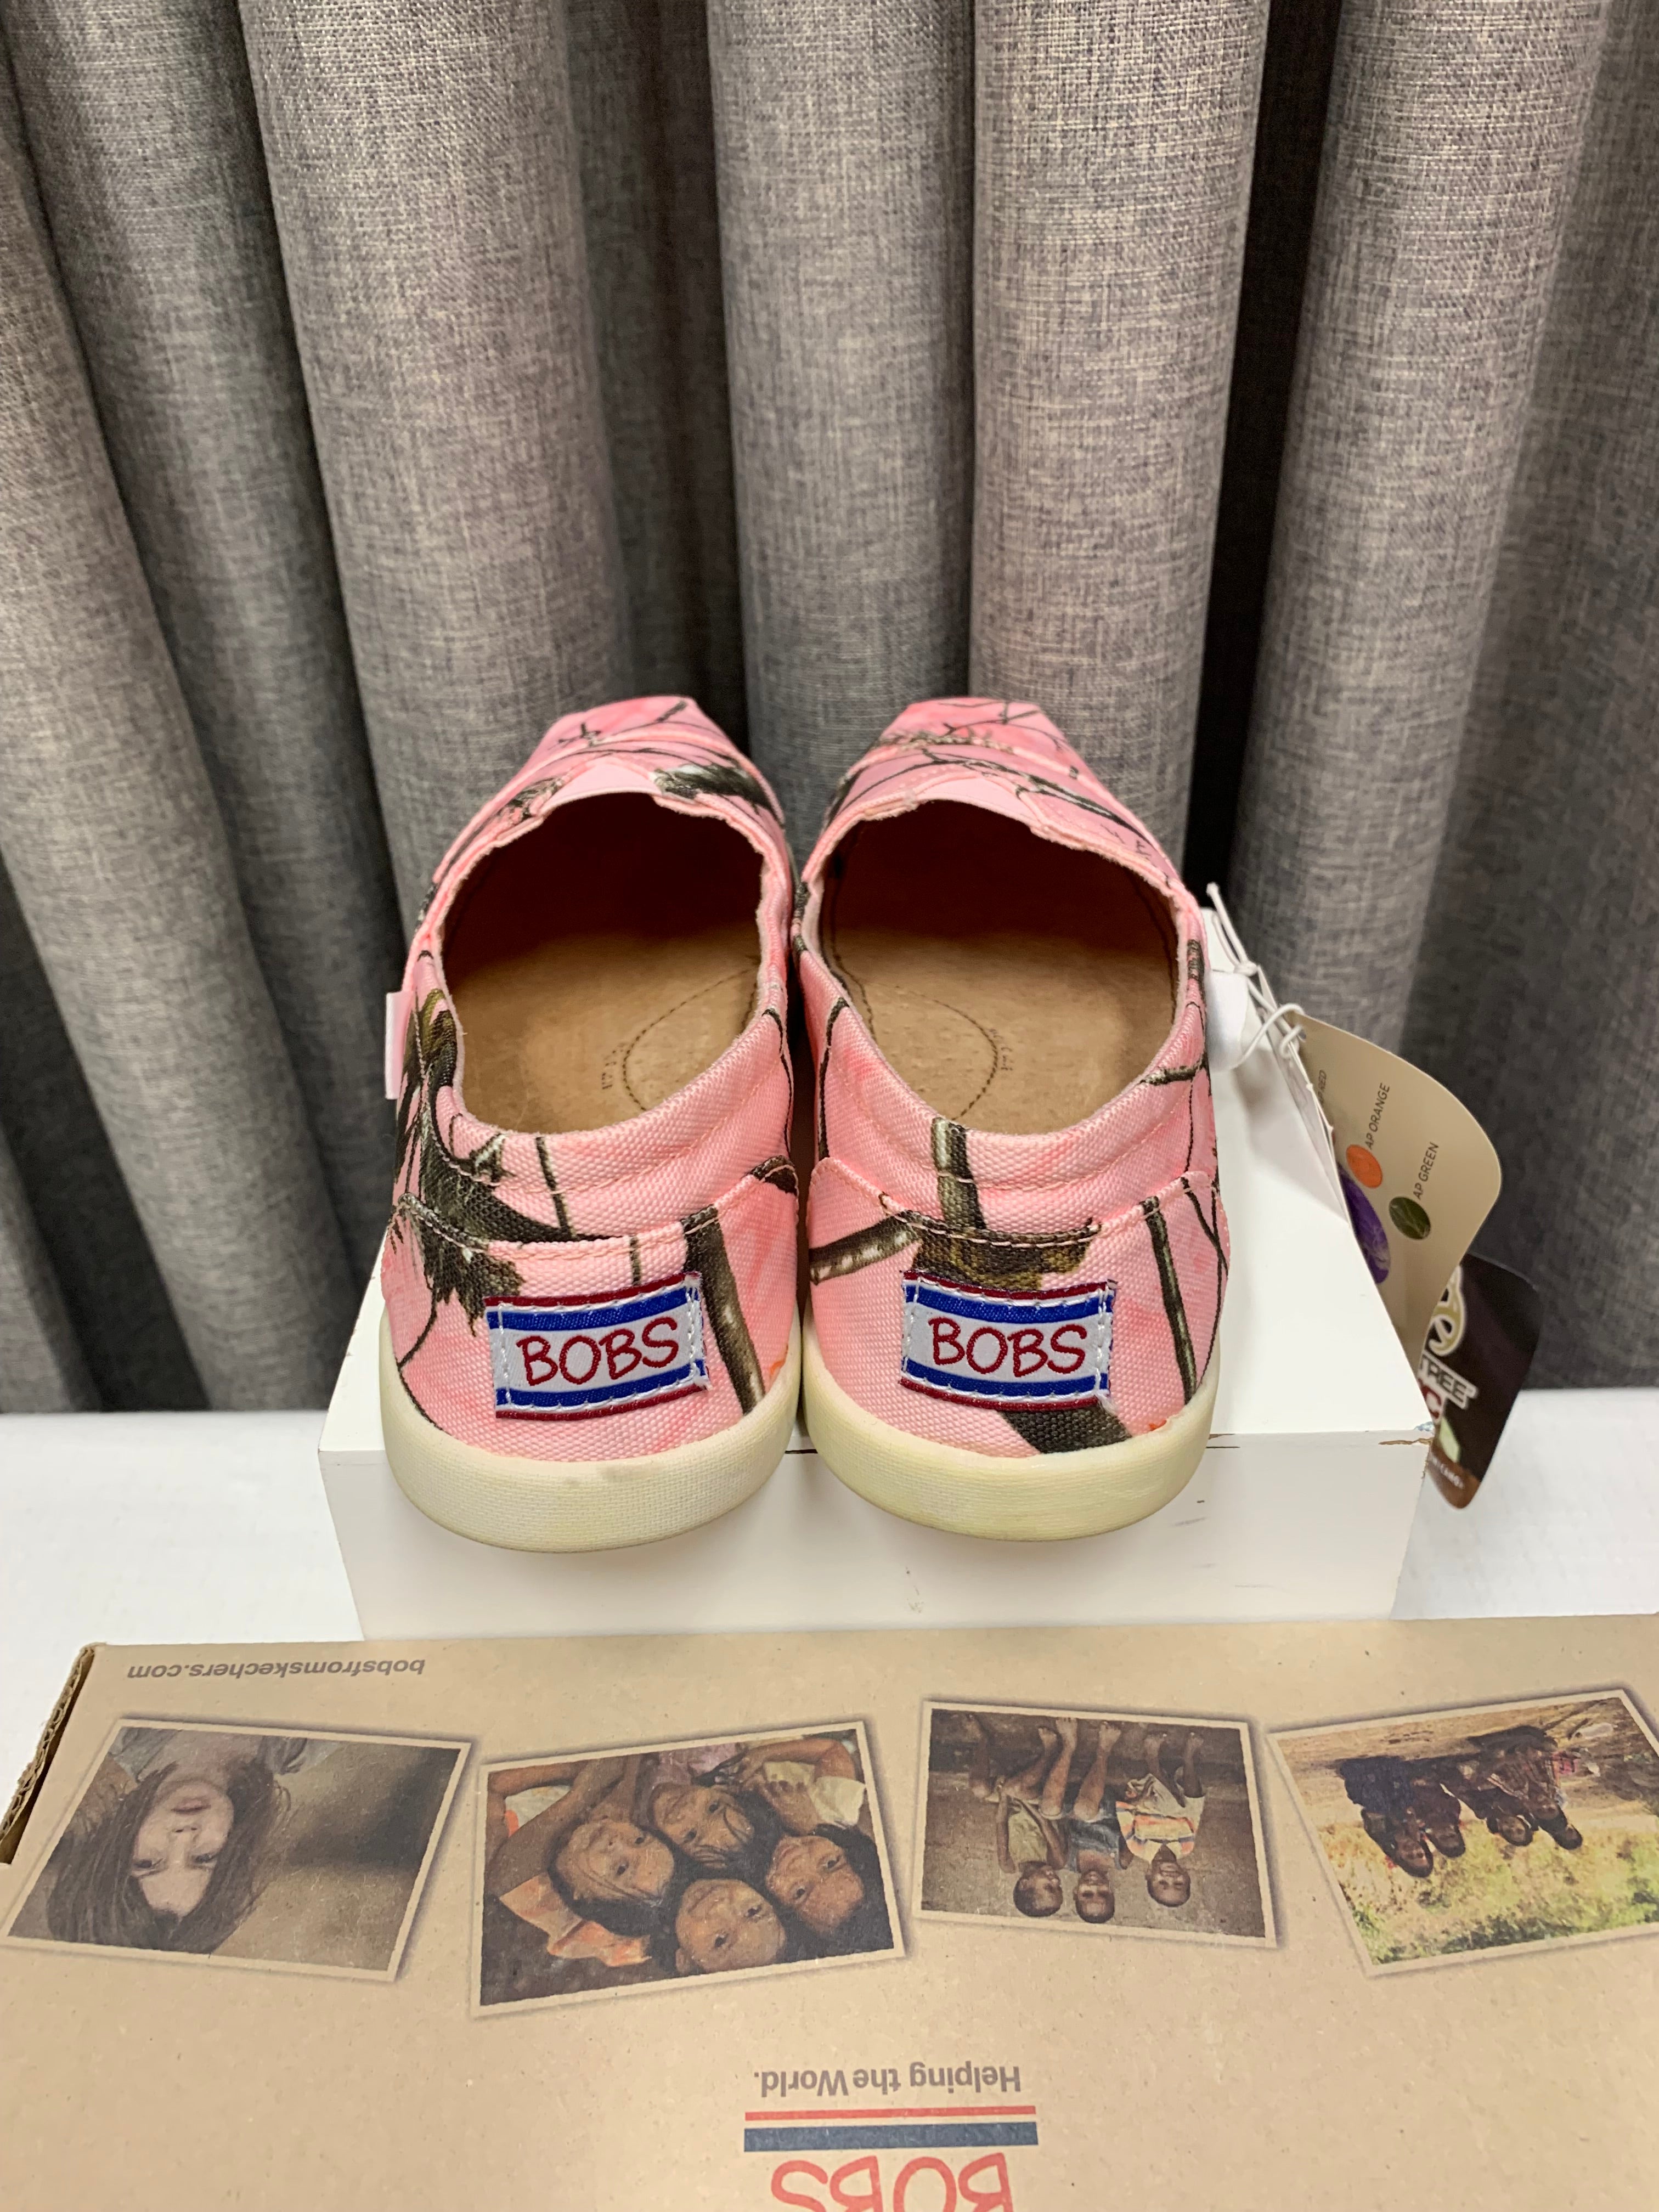 Bobs from Skechers World Hide and Seek / Size US 6.5